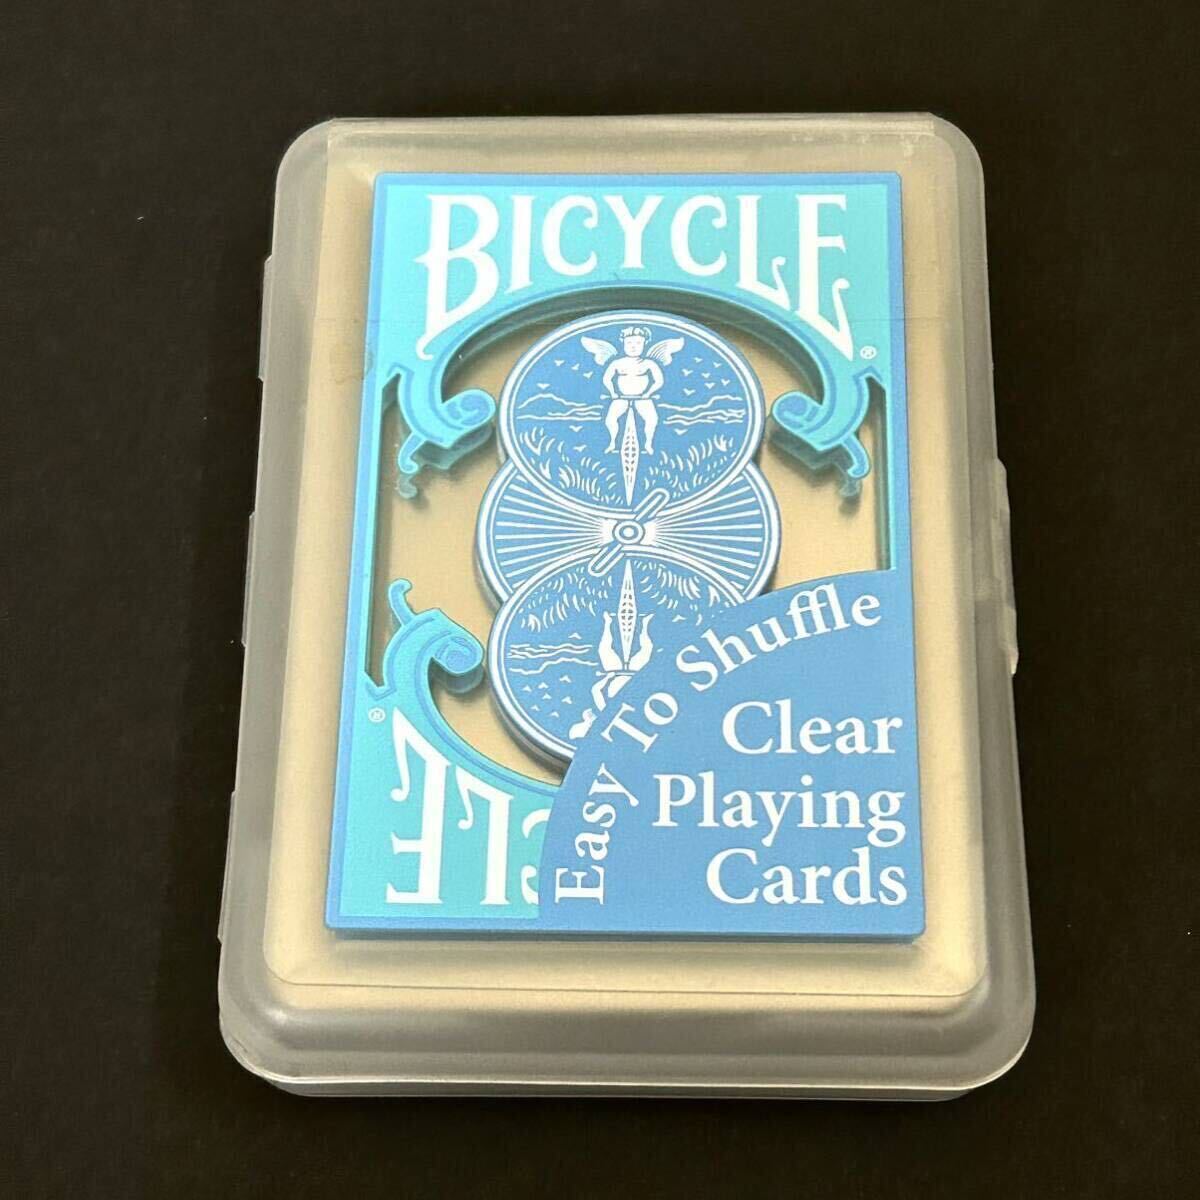 Bicycle Clear Playing Cards バイスクル クリア トランプ ブルー【絶版】の画像1